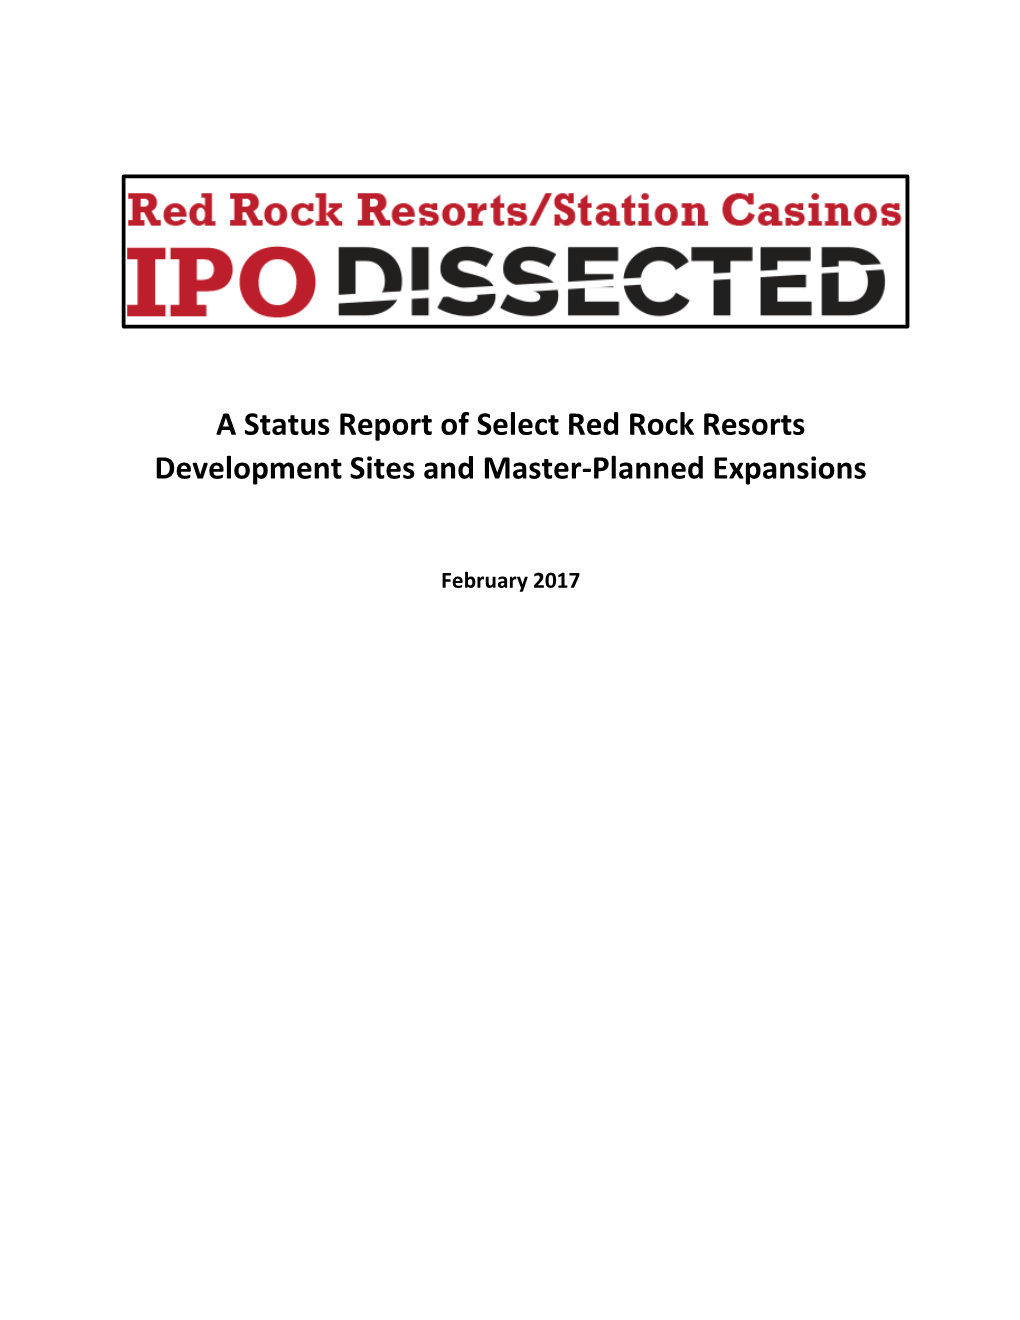 A Status Report of Select Red Rock Resorts Development Sites and Master-Planned Expansions